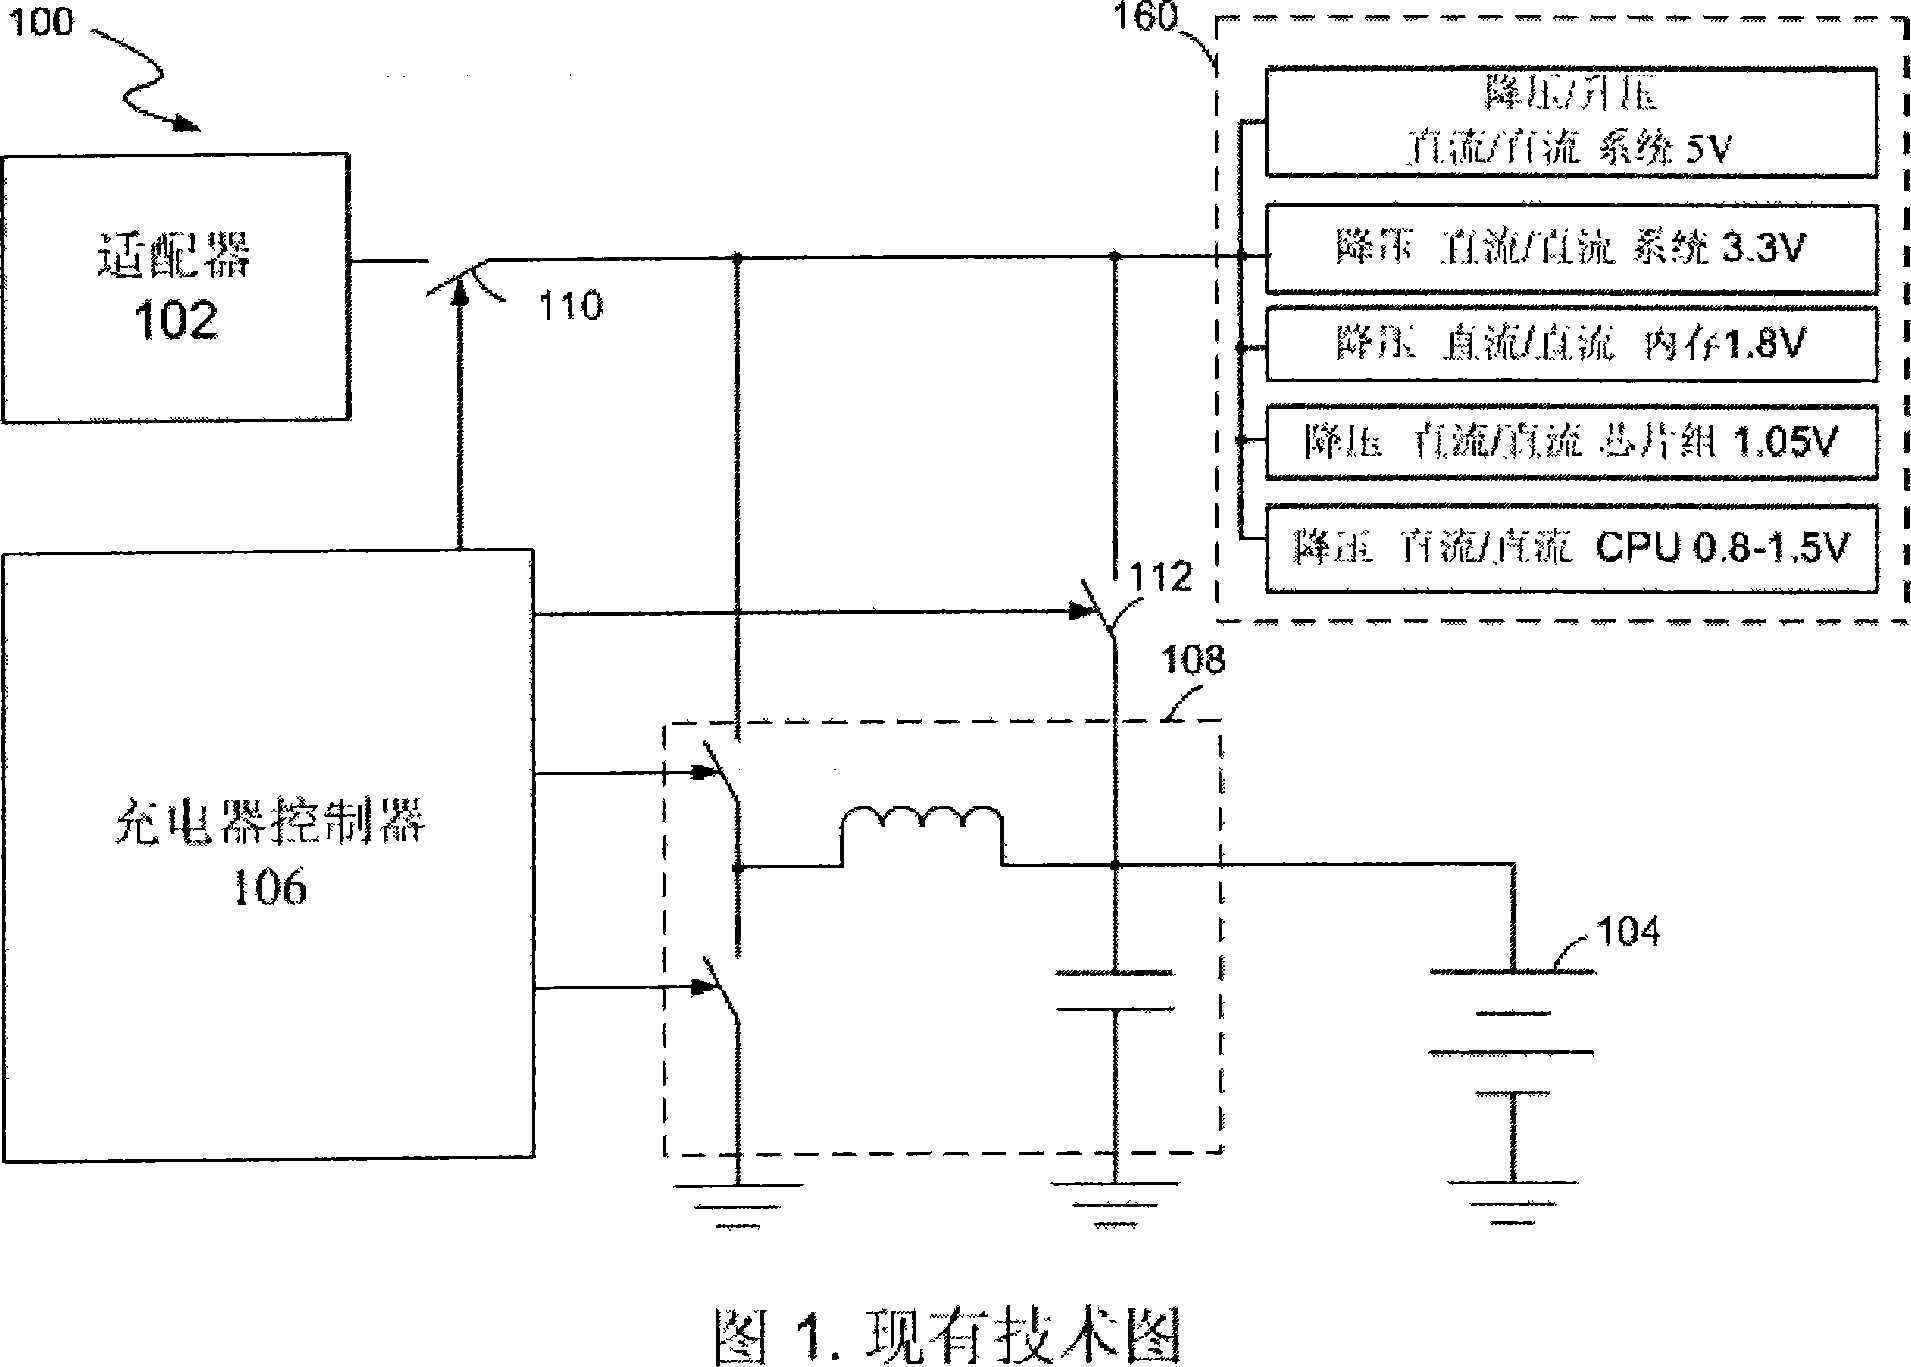 Power management system with charger and boost controller